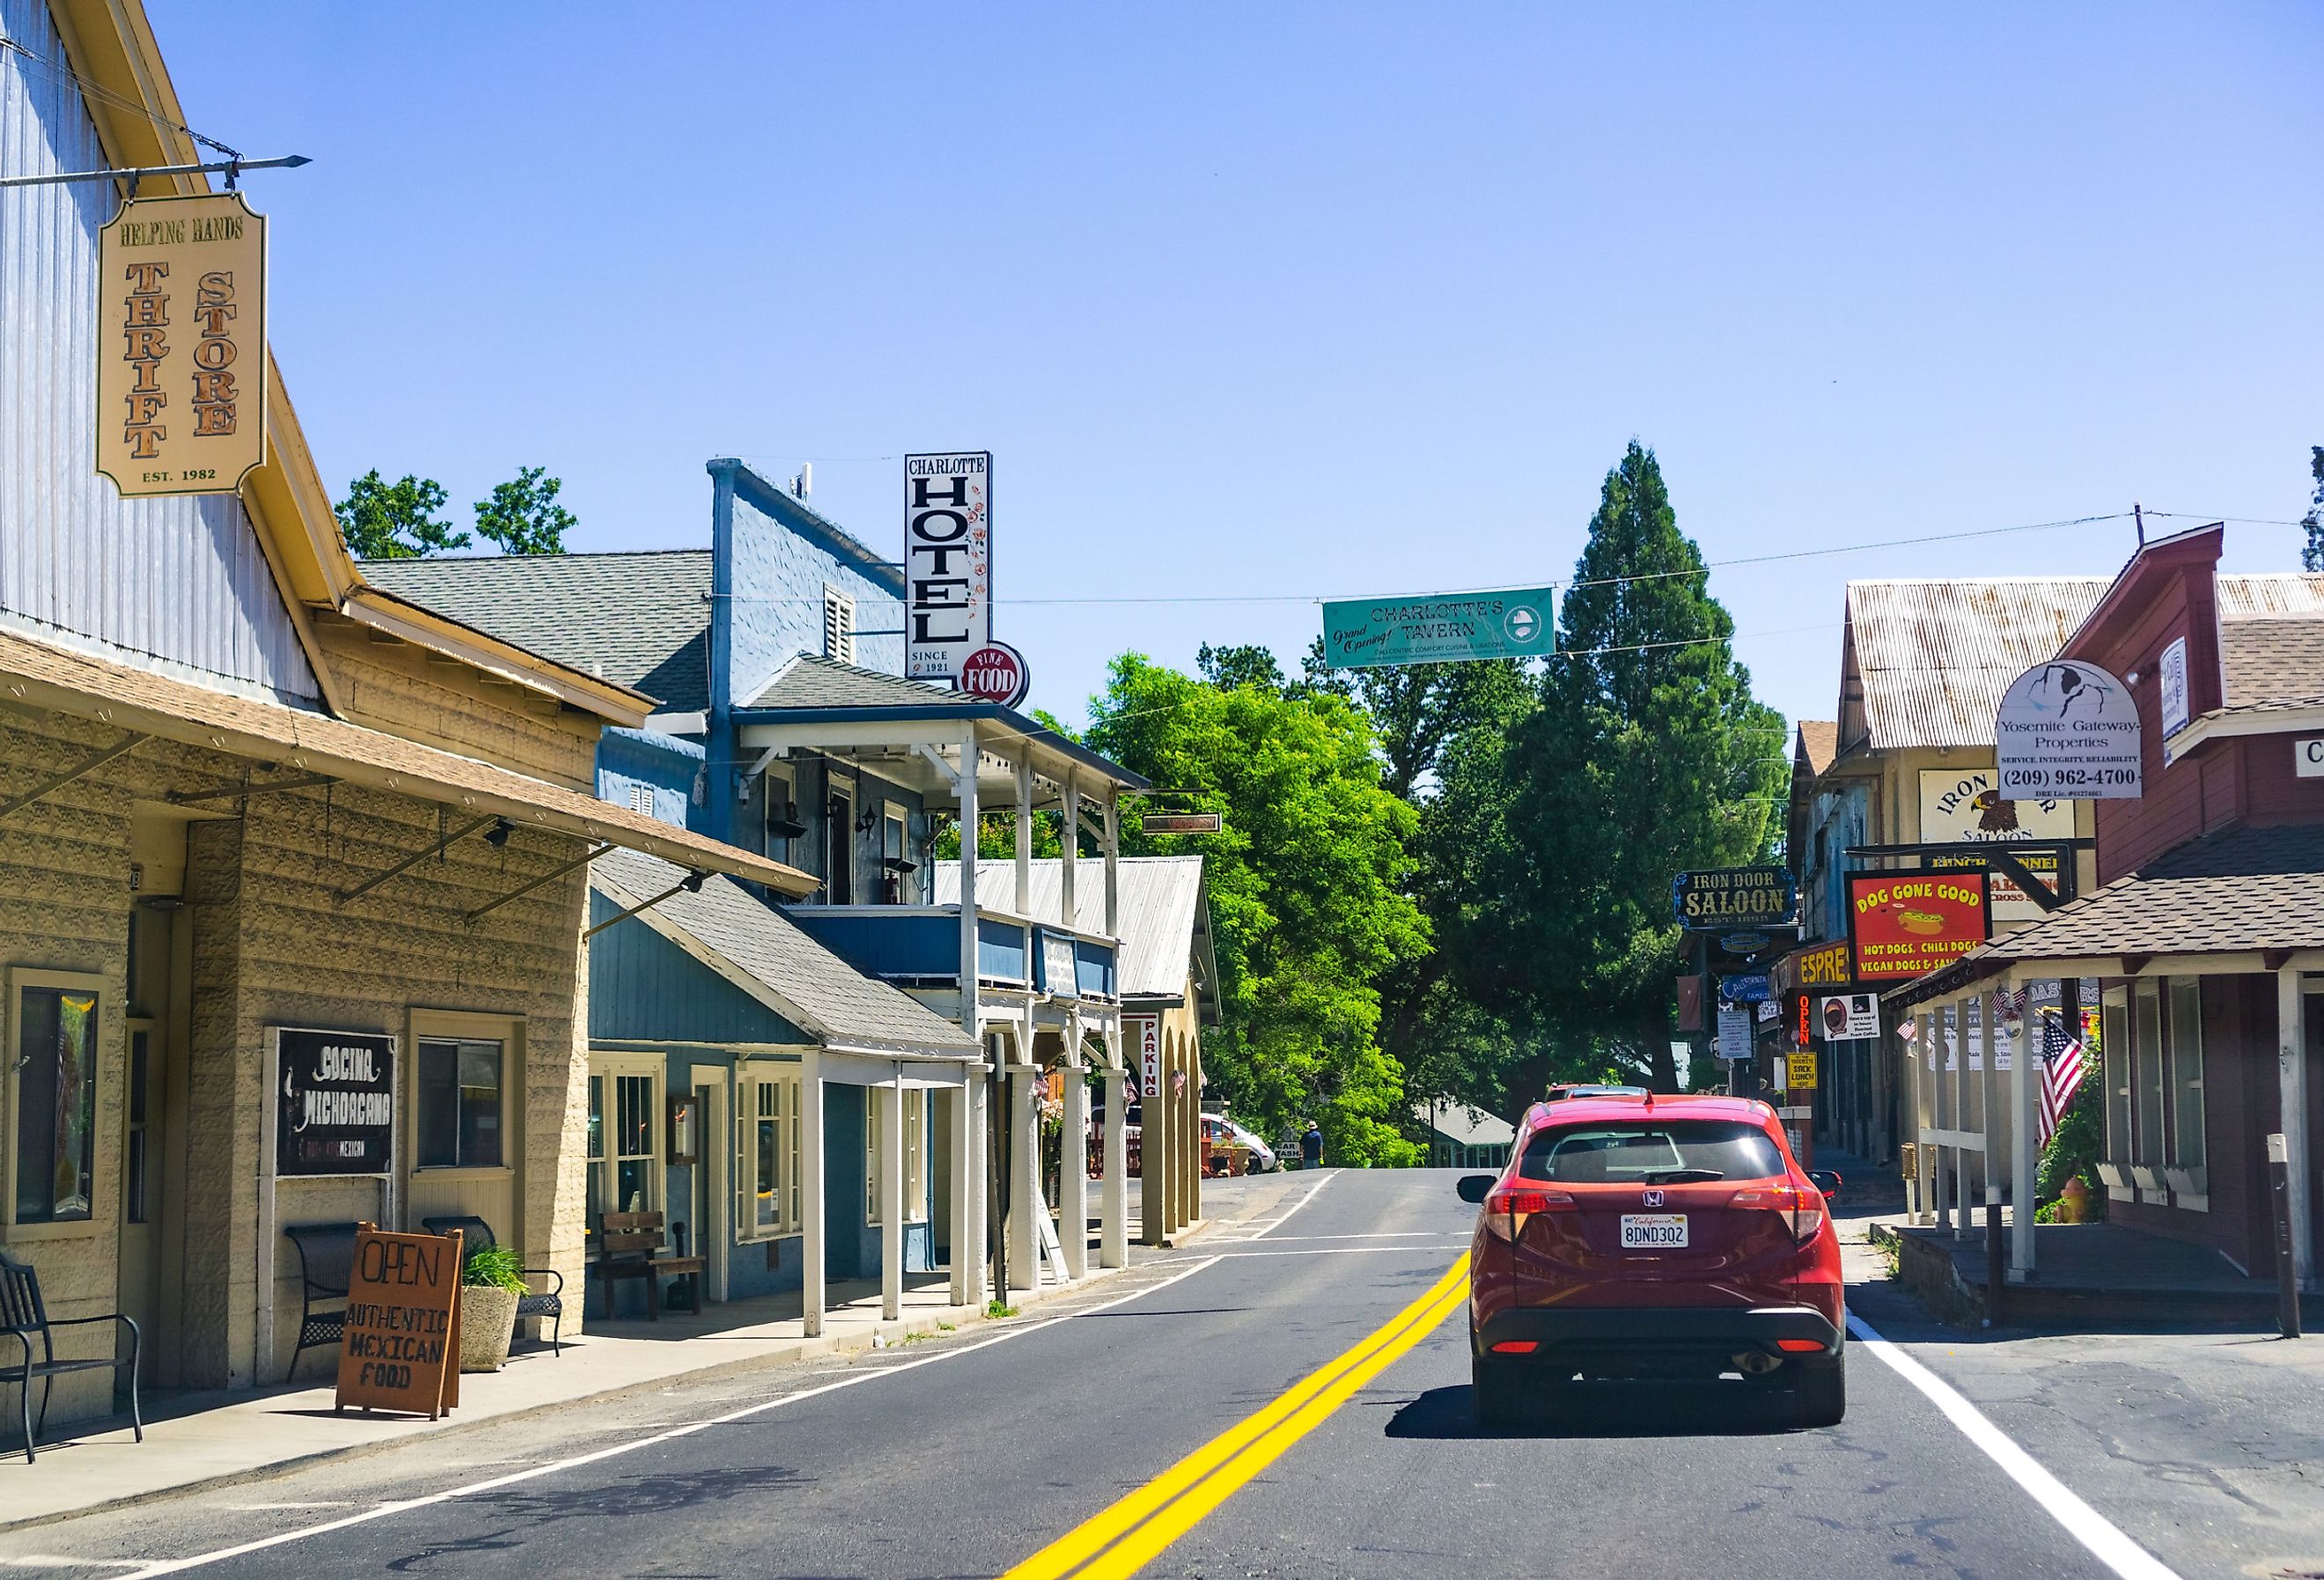 Passing through Groveland on the way to Yosemite National Park, Sierra Nevada mountains. Image credit Sundry Photography via Shutterstock.